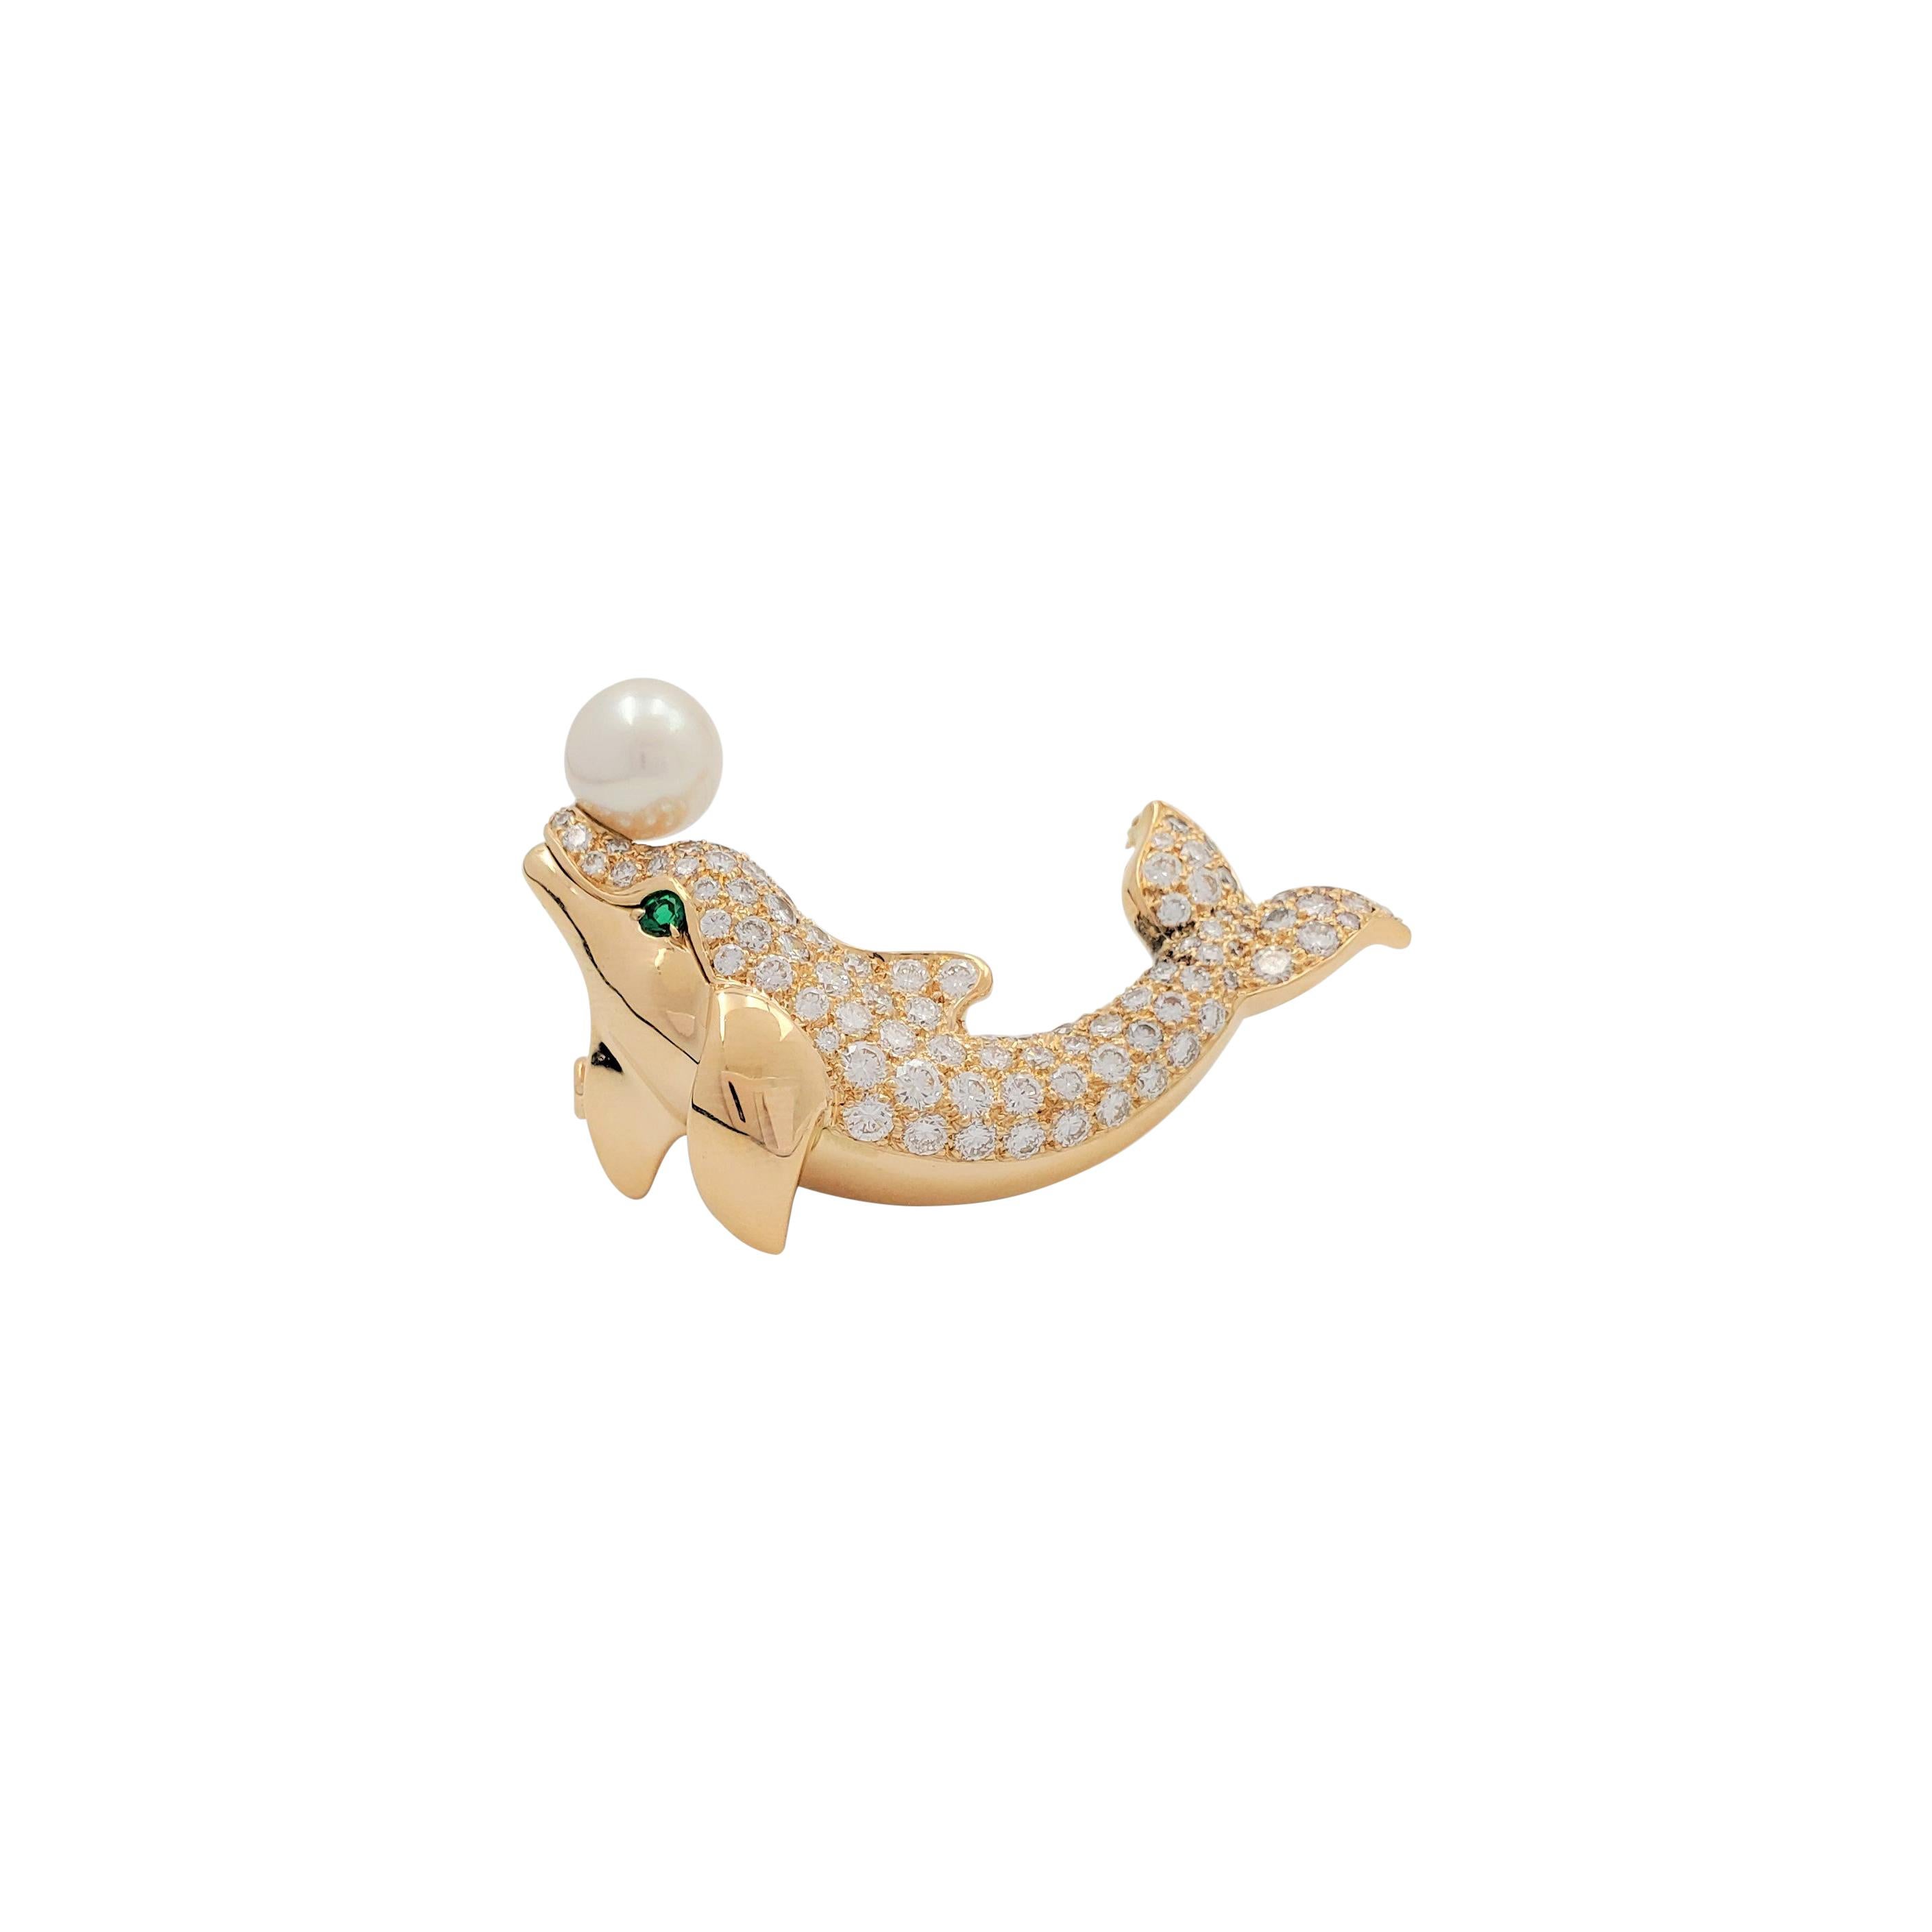 Vintage Cartier Yellow Gold Diamond Pearl and Emerald Dolphin Brooch